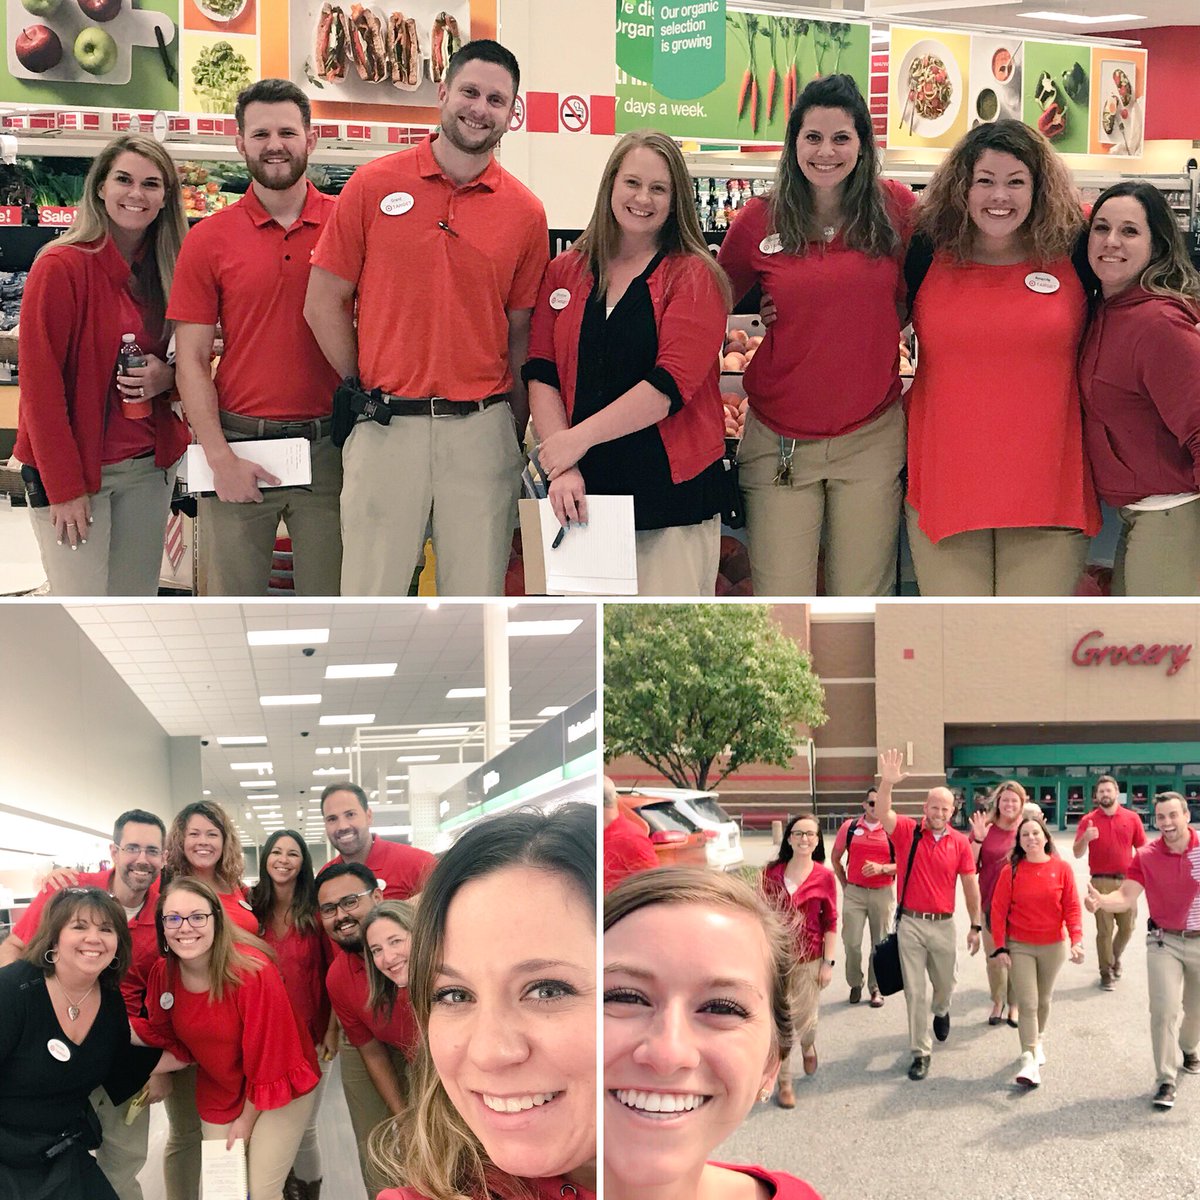 Dang D105 is fired UP! Had a fantastic couple days talking optimizing and modernizing with this talented team! @natelane39 @Bentley_Jane22 & @ryan9perry are driving BIG comps and there’s more in store! Thank you guys for the insight and commitment! #G196MRP #D105Domination